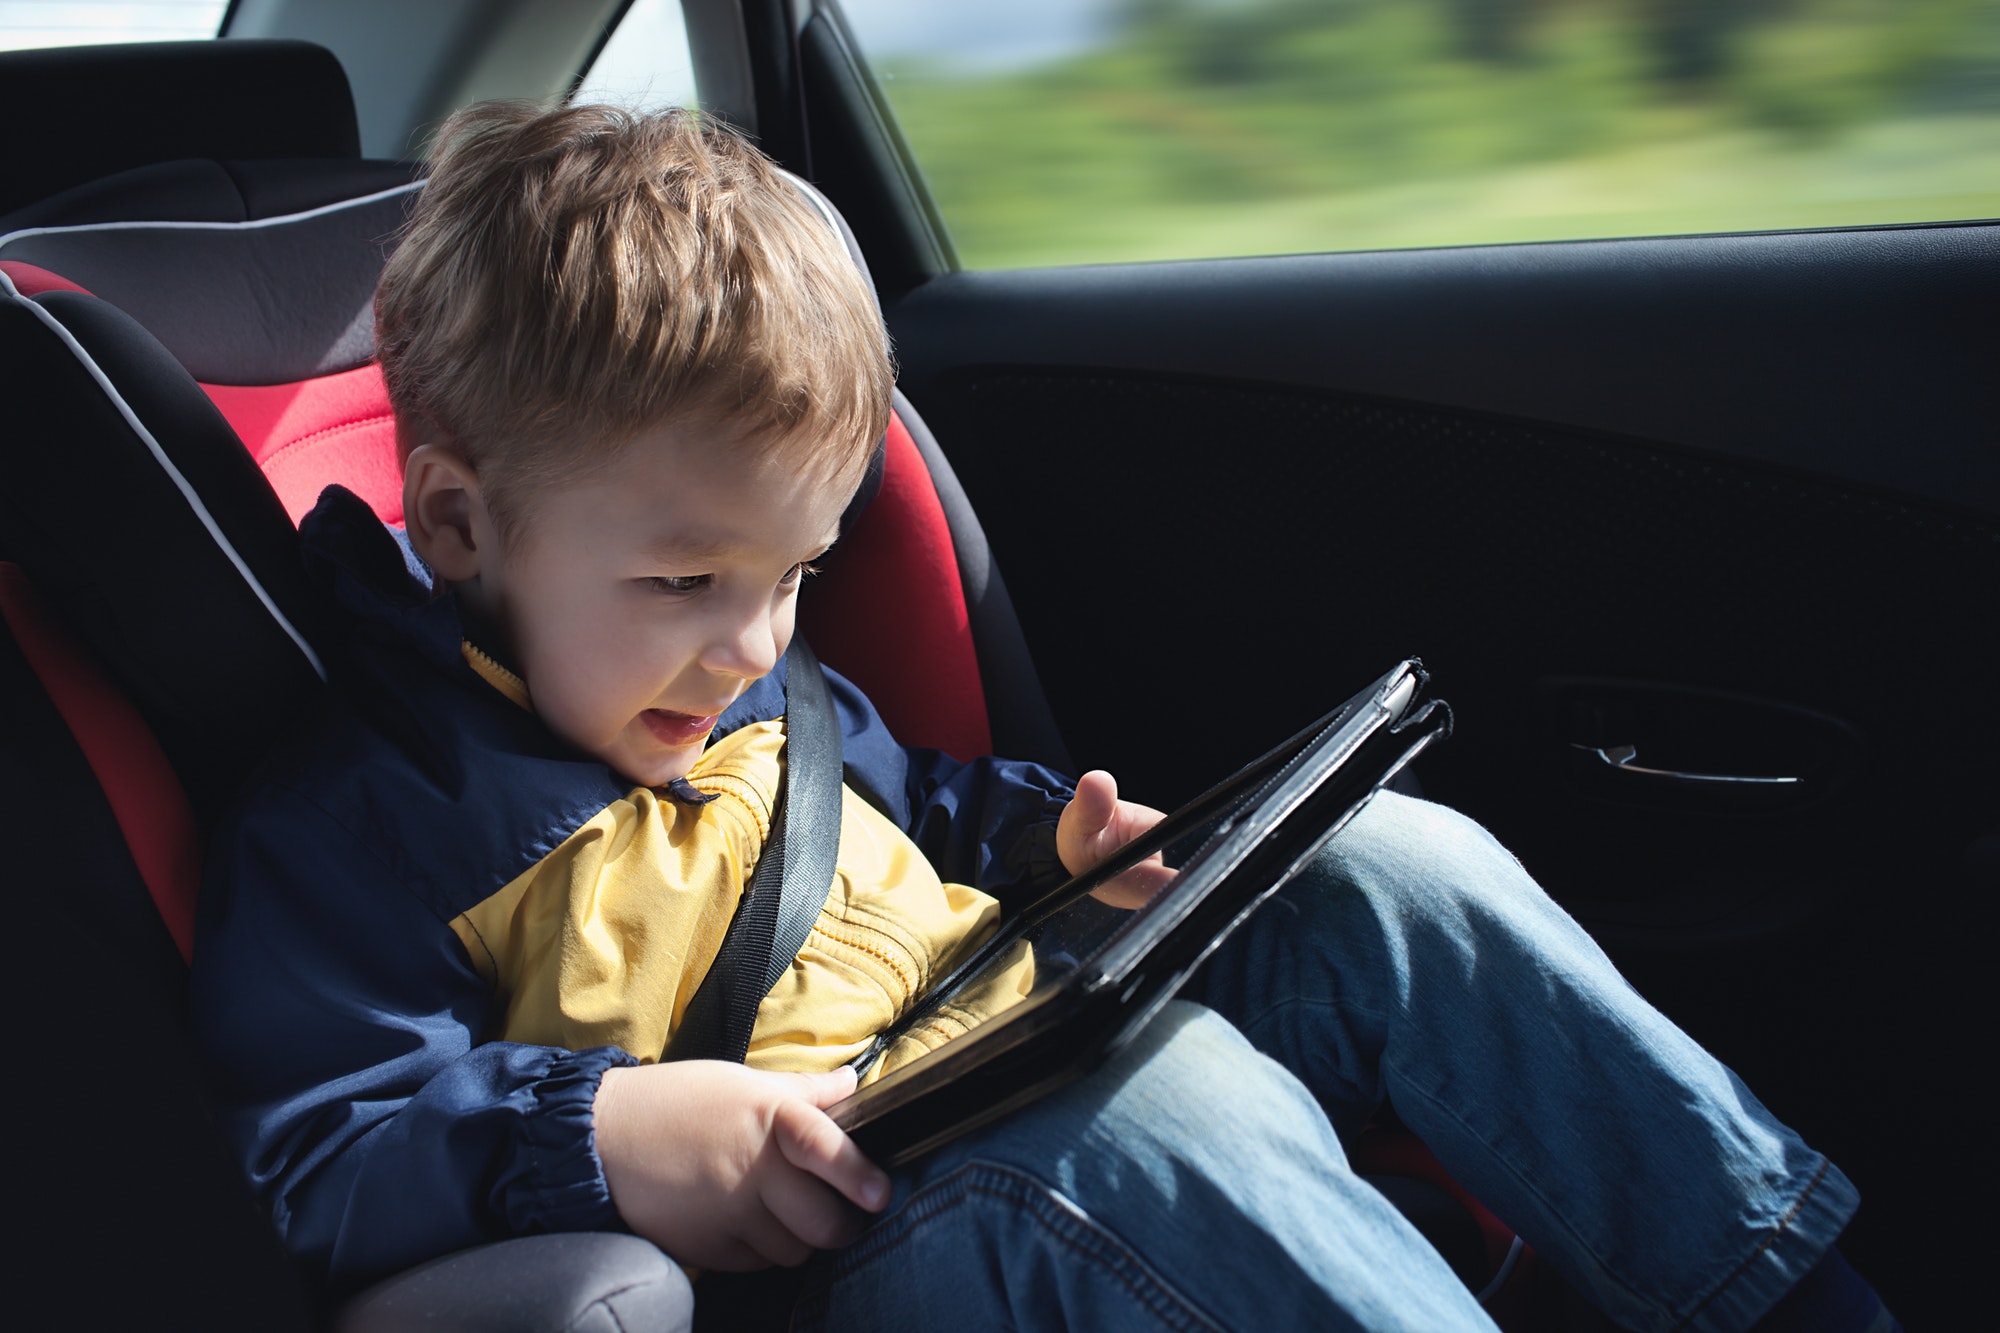 Child in the car with tablet PC